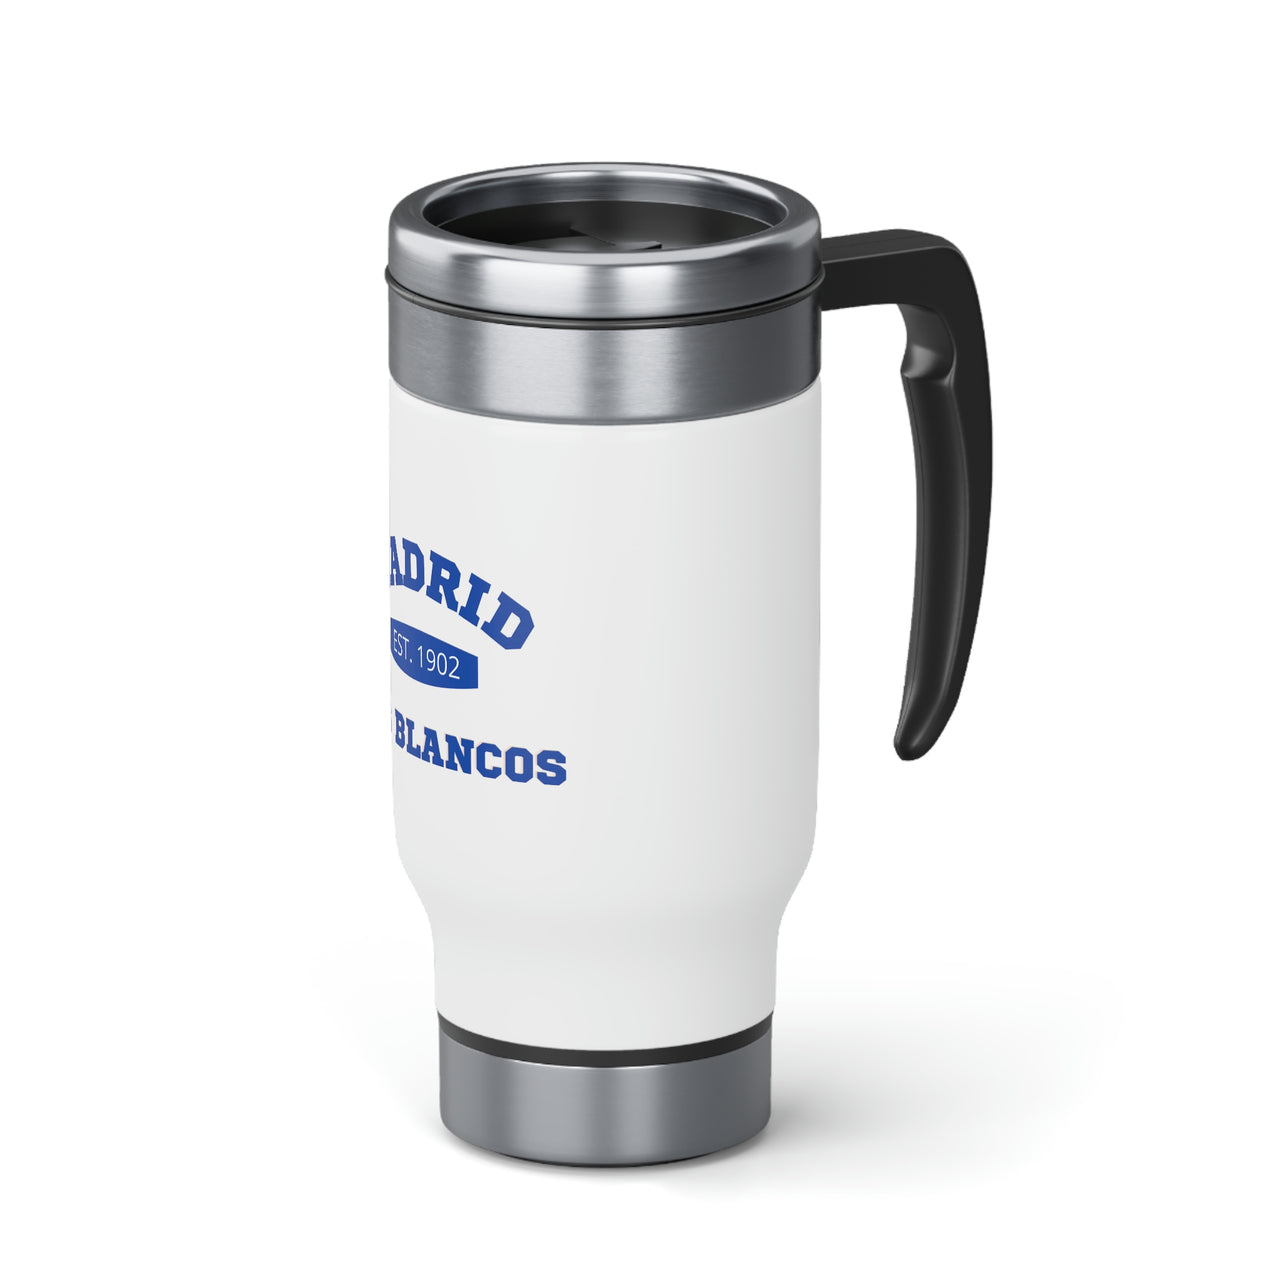 Real Madrid Stainless Steel Travel Mug with Handle, 14oz